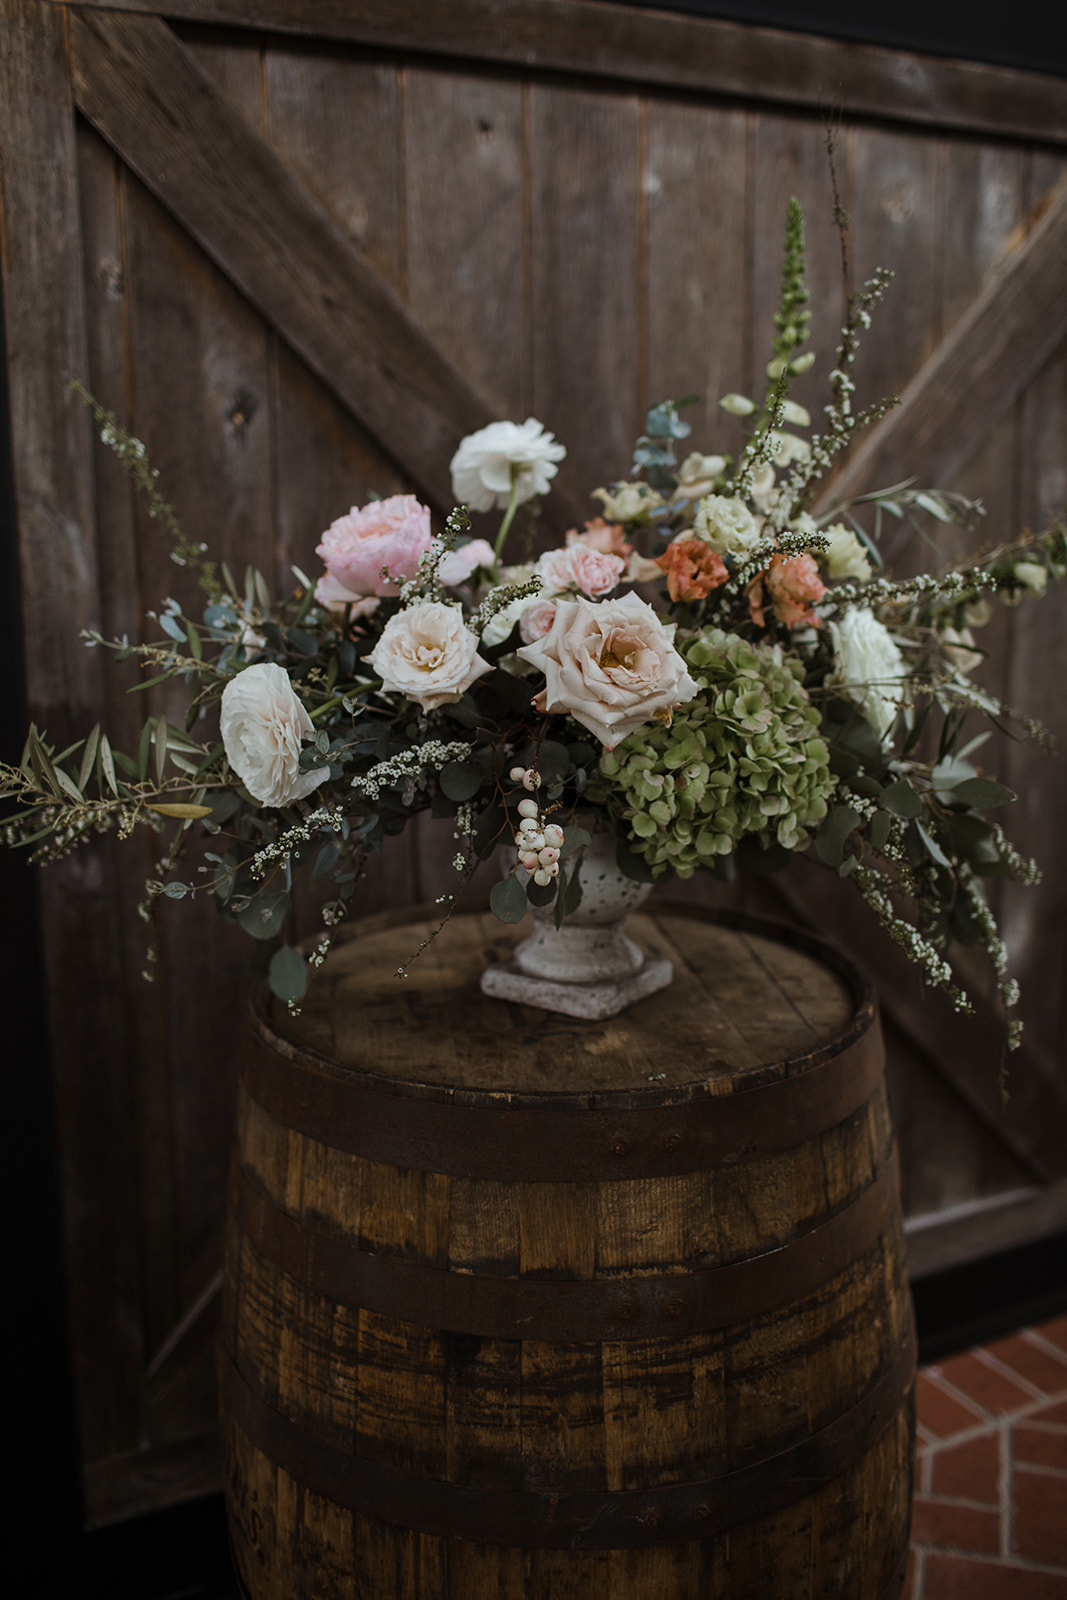 Rustic, countryside wedding outside Nashville with garden-inspired floral design.